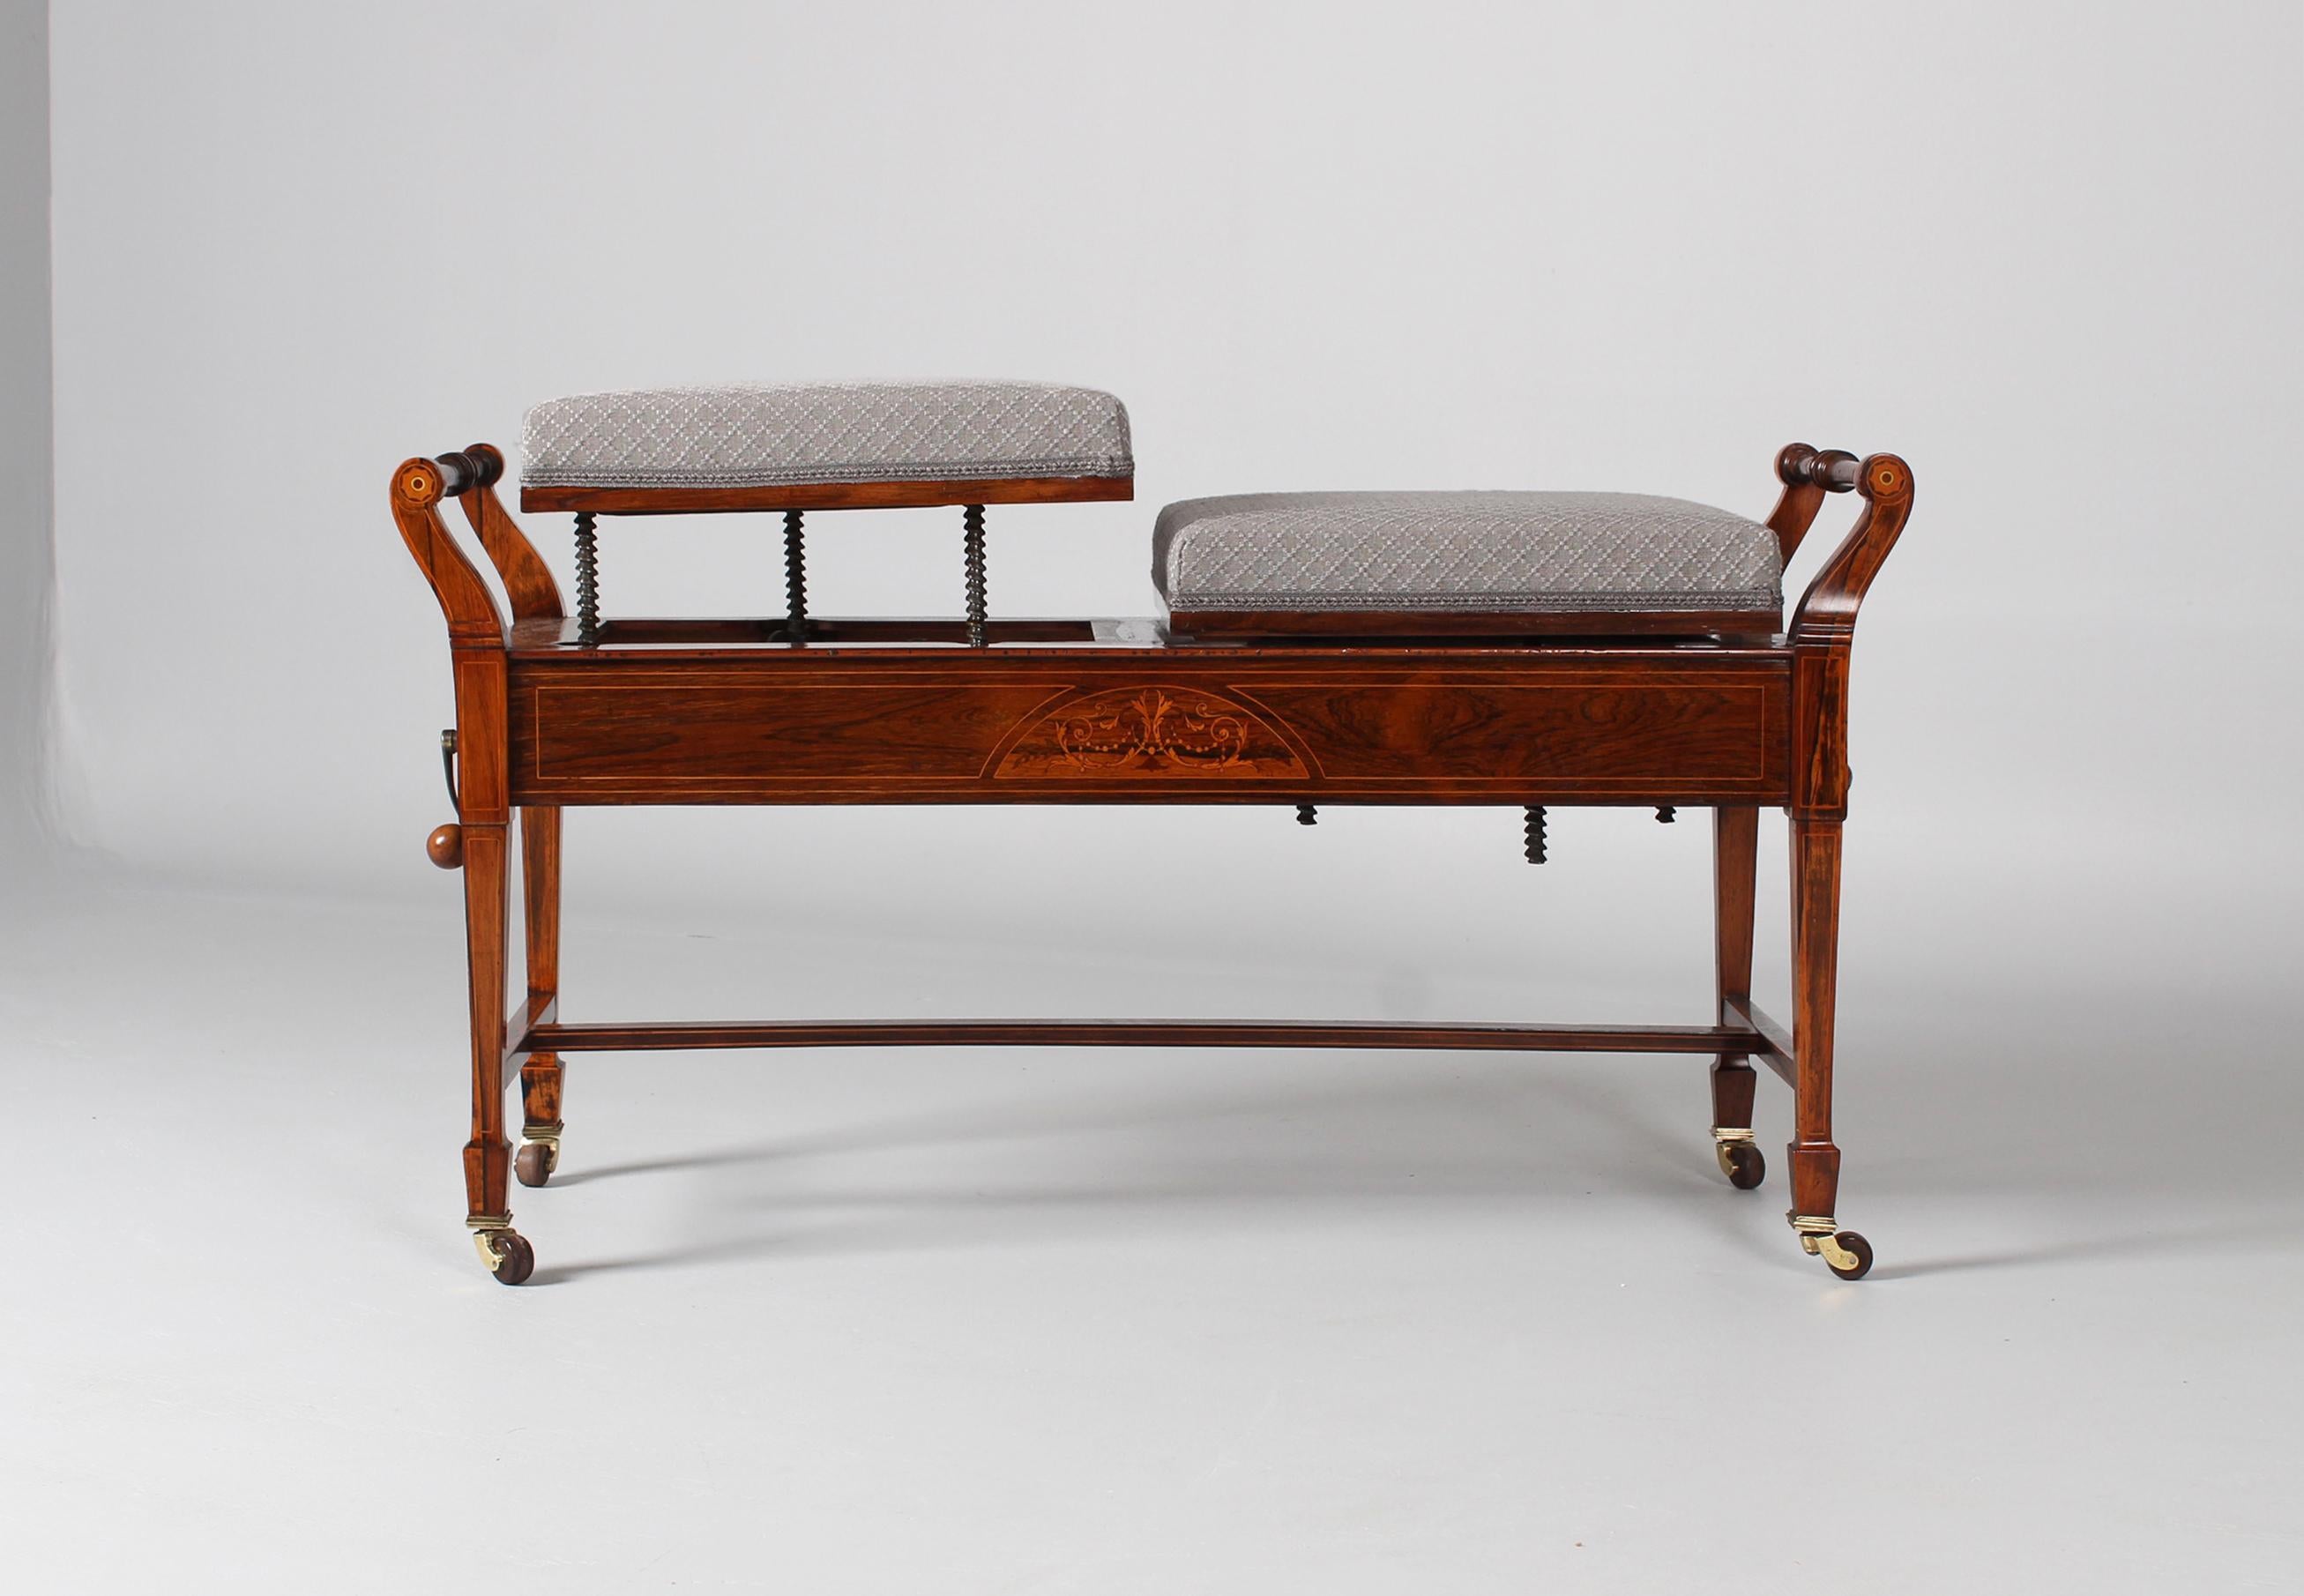 Antique duet piano bench

England
Edwardian, early 20th century.

Dimensions: seat height (from - to): 49 - 59 cm, width: 100 cm, depth: 36 cm

Description:
Absolutely rare antique duet piano bench from England.

Rolling bench standing on